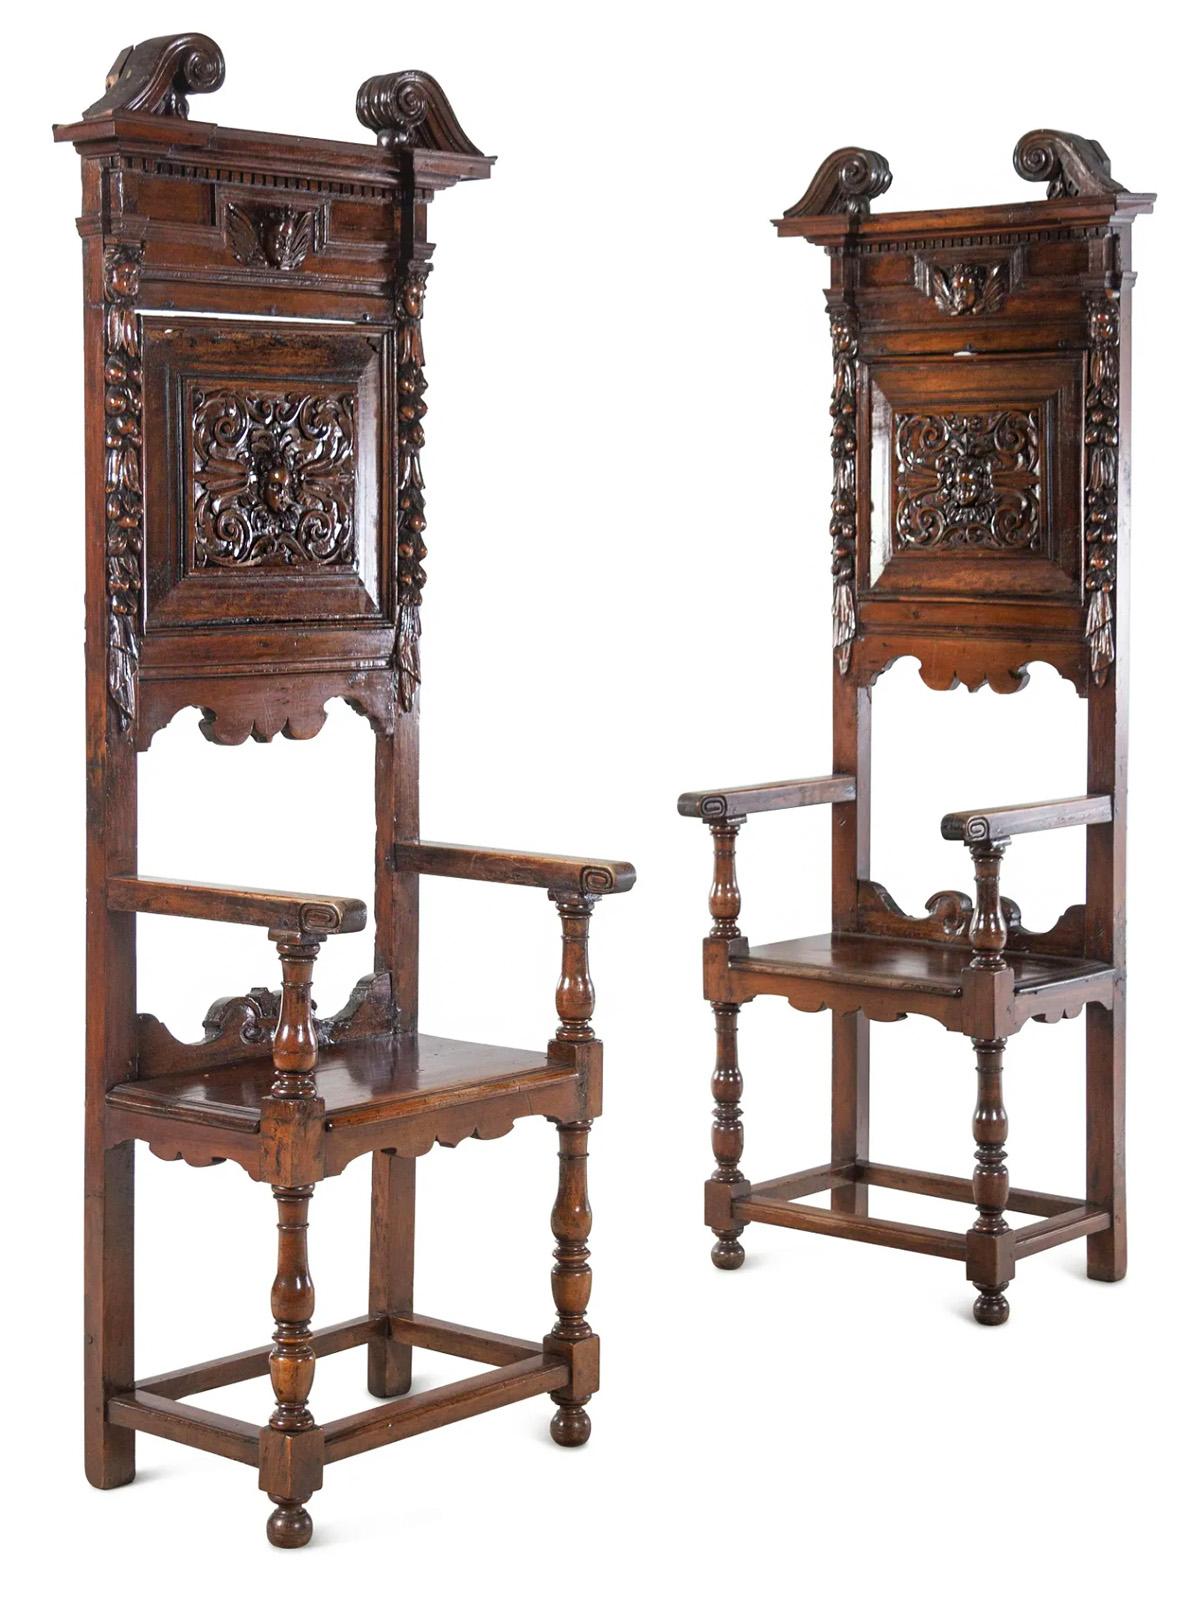 A pair of 17th century Renaissance Revival style tall-back armchairs carved from walnut with velvet seat cushions. 

Dimensions: 84